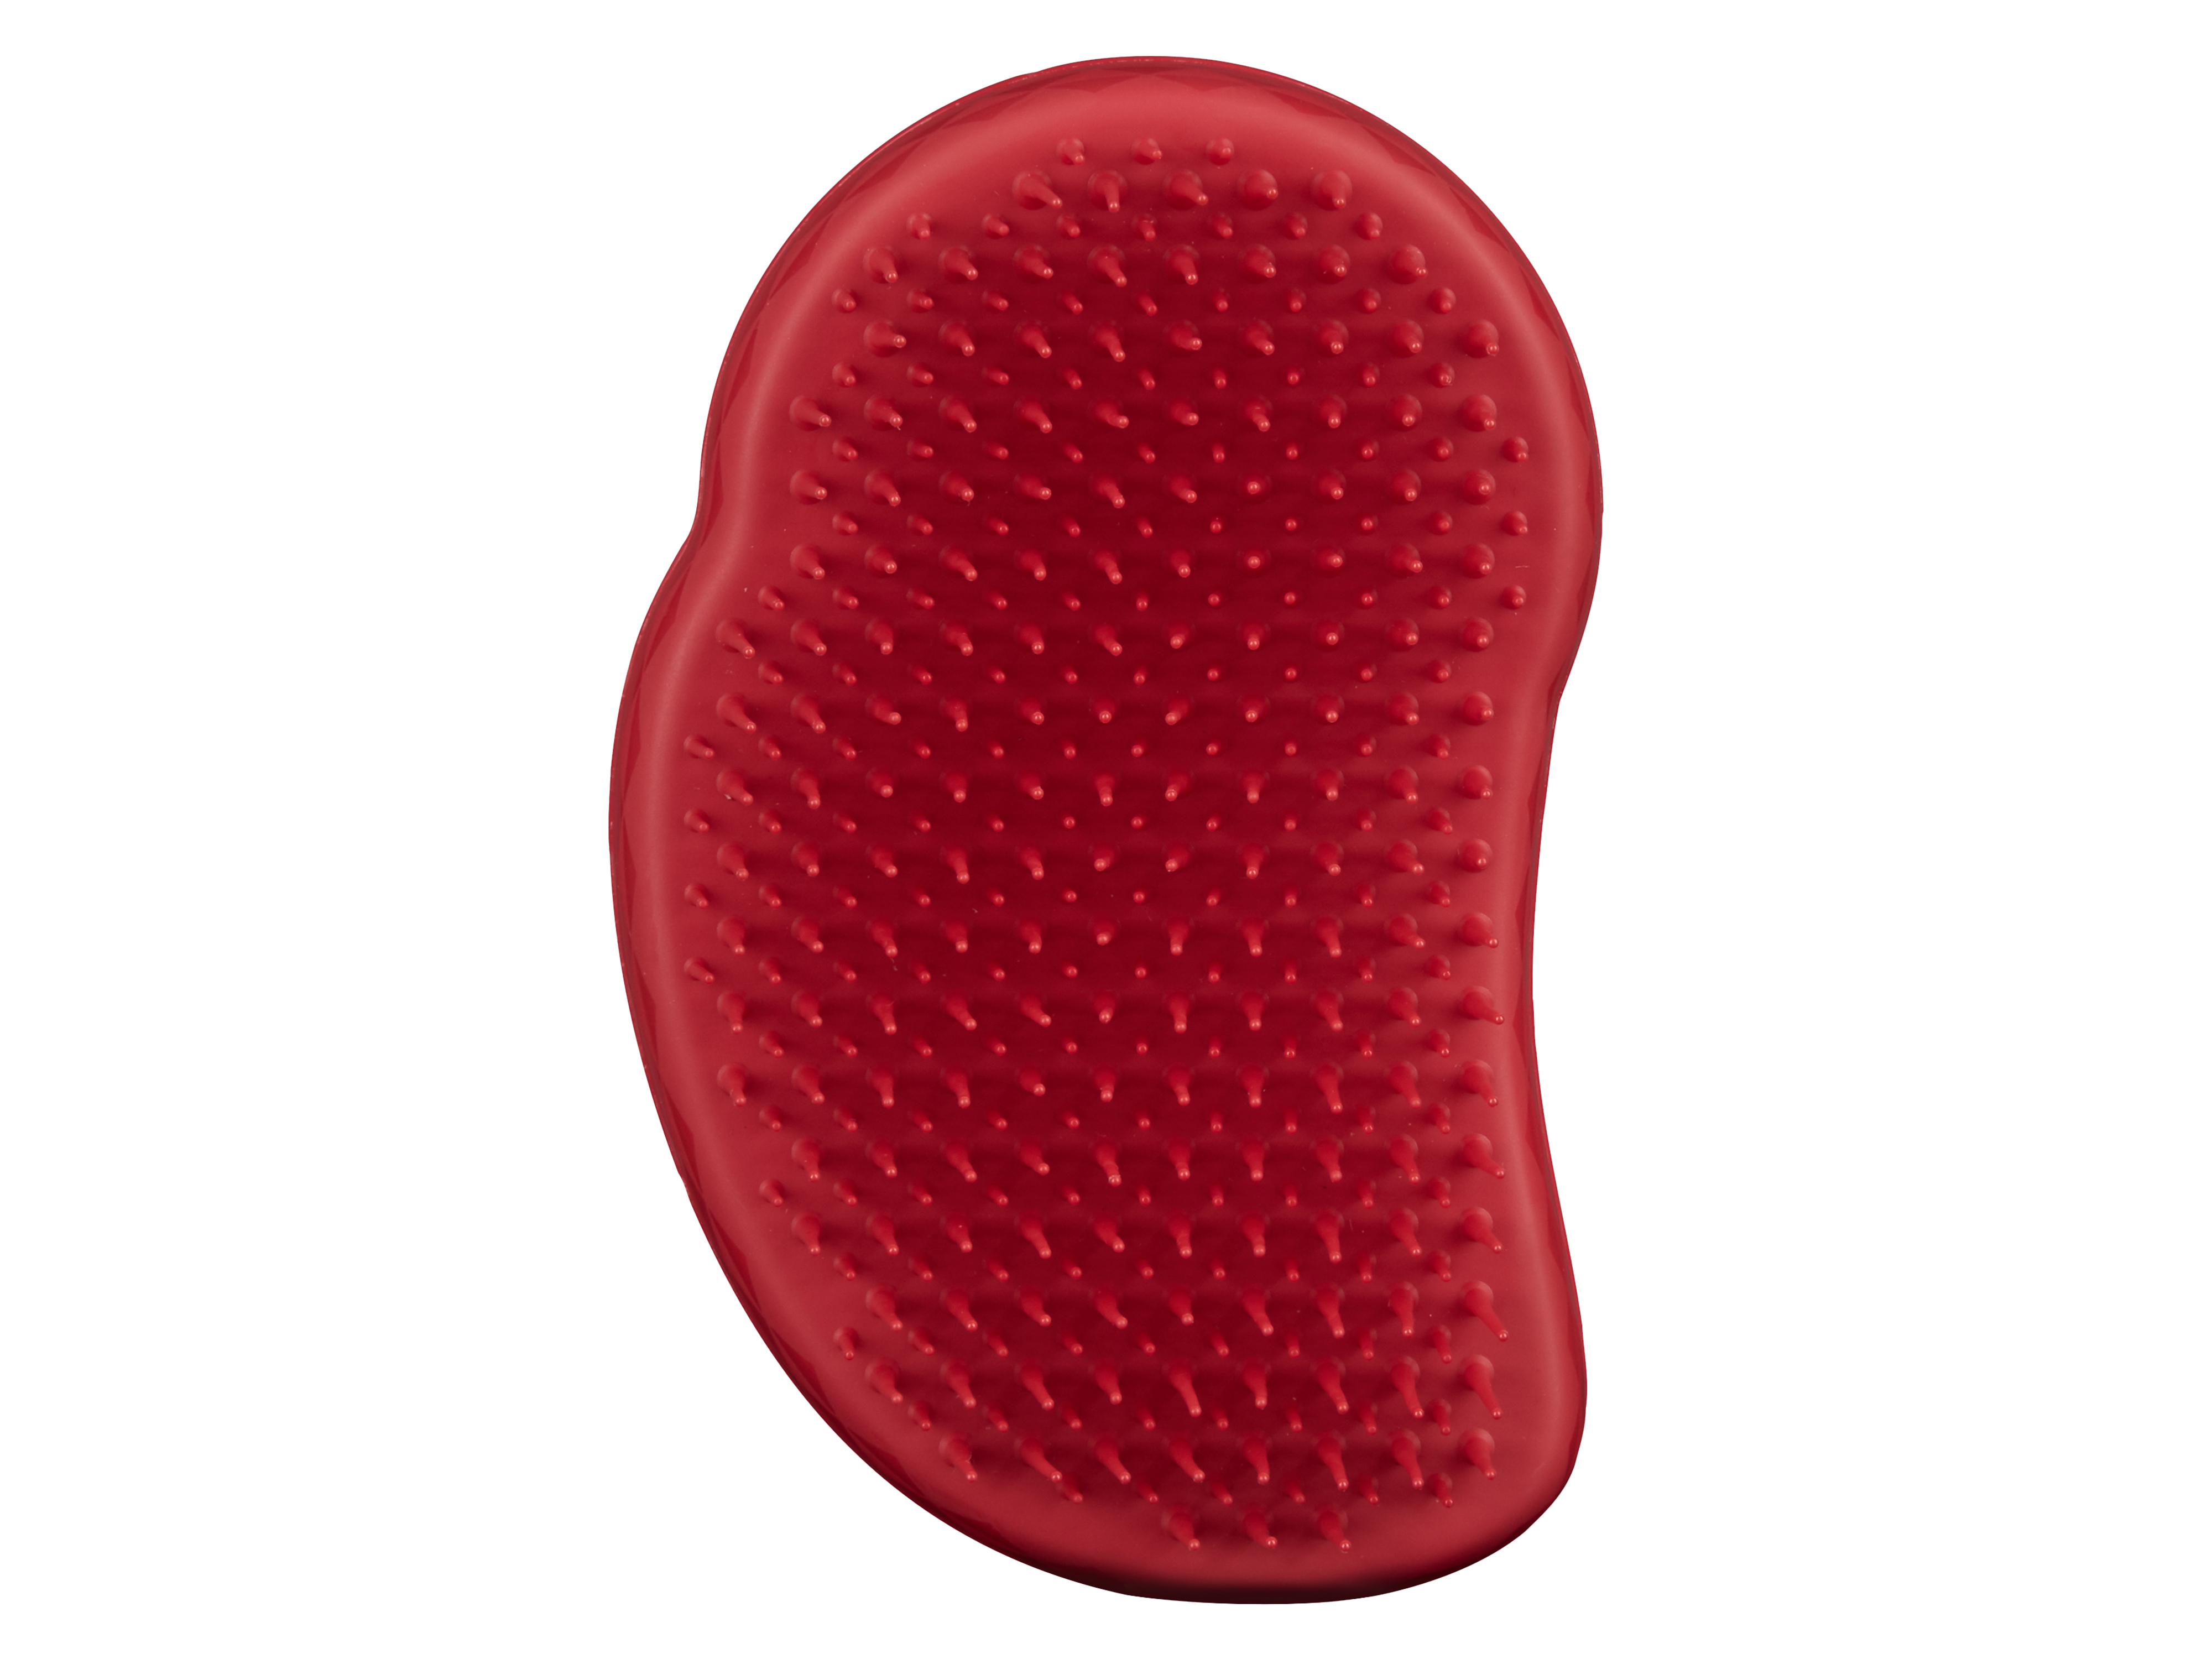 Tangle Teezer Thick & Curly, Salsa Red, 1 stk.